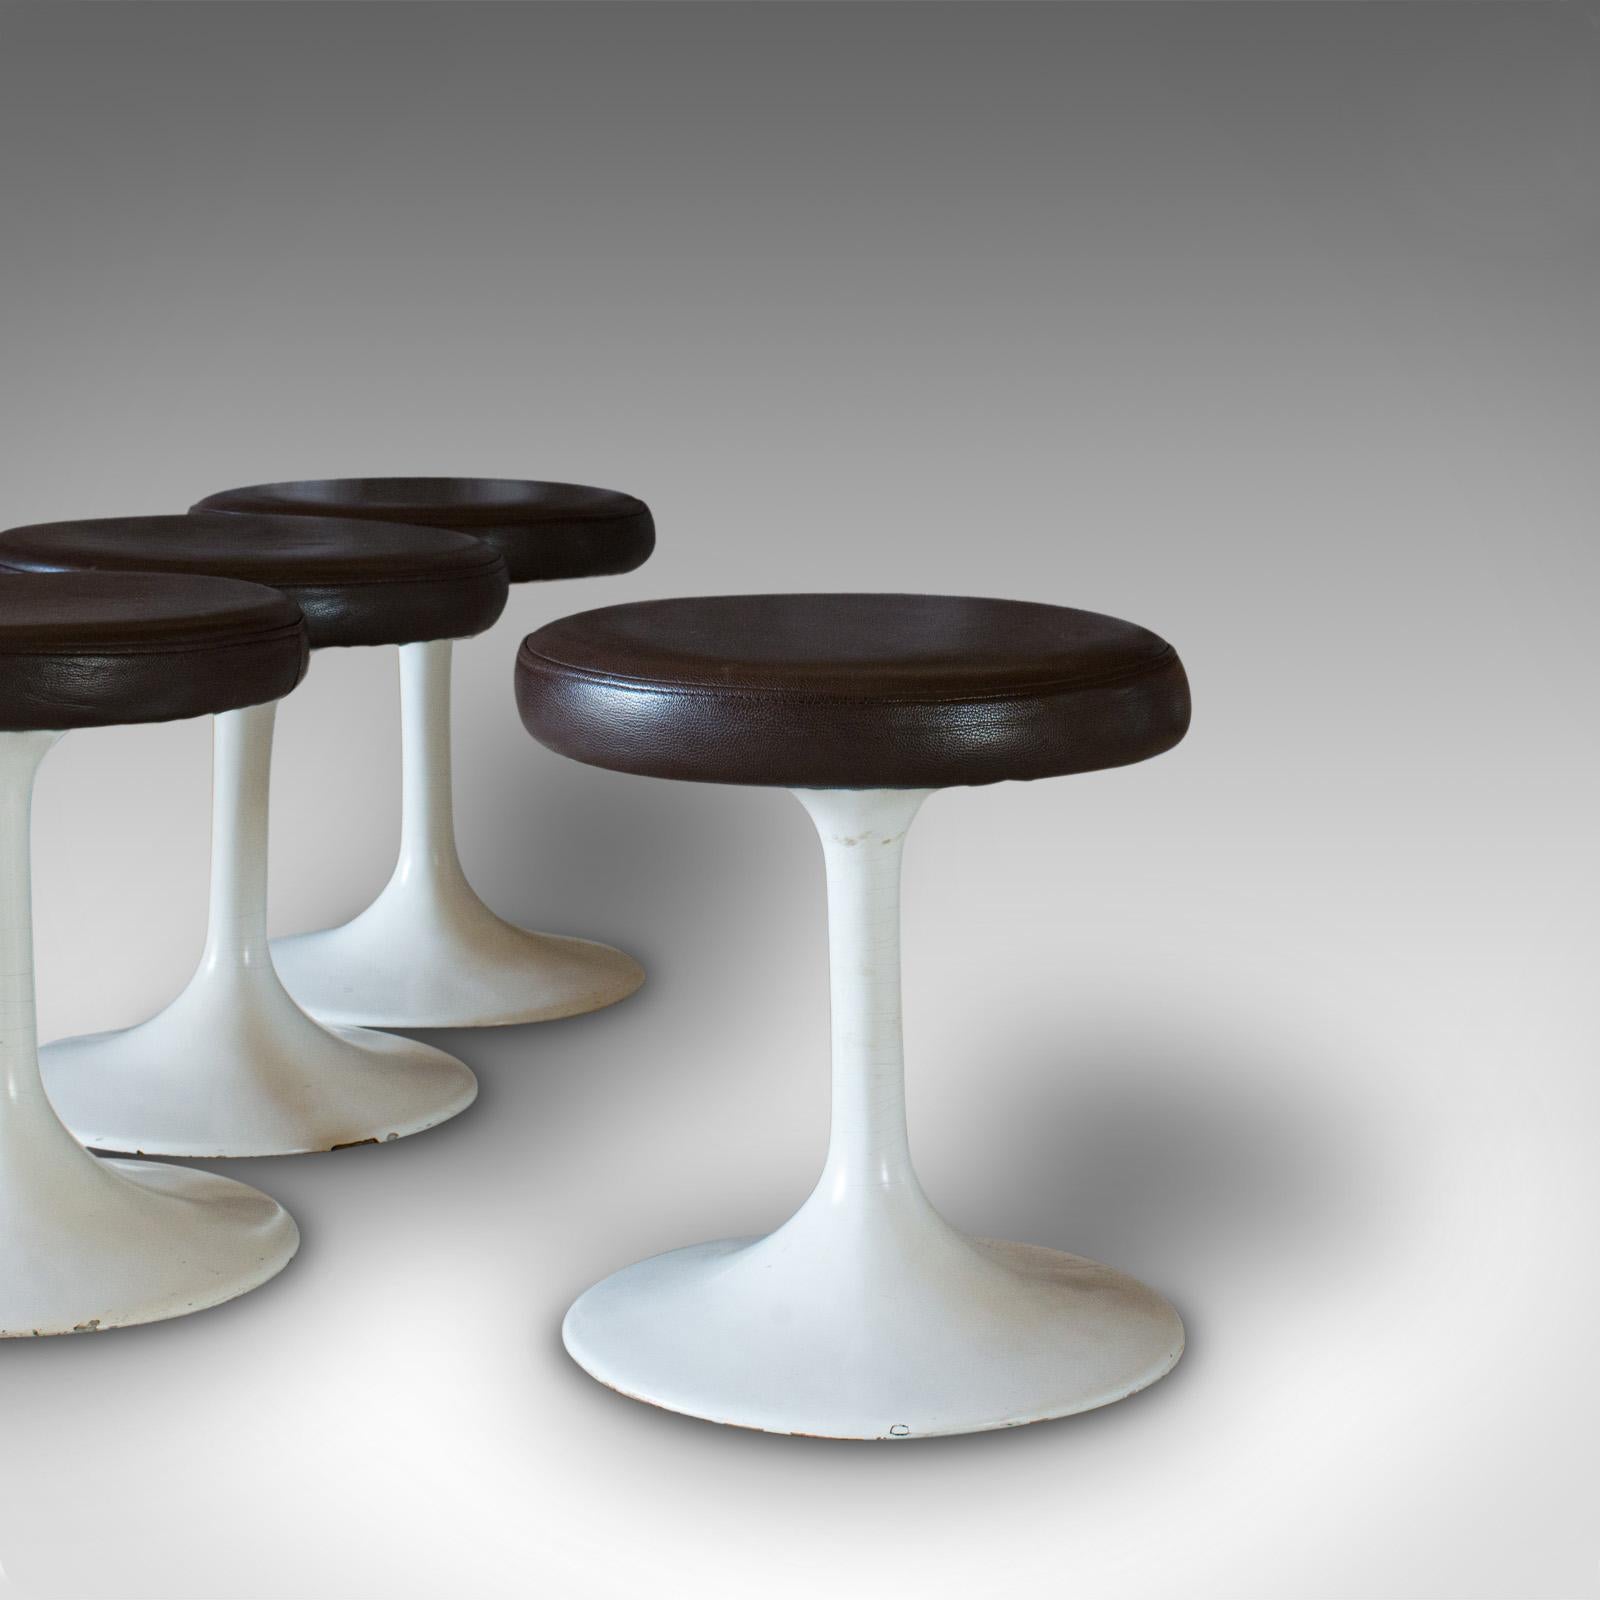 This is a set of 4, vintage stools. A French, leather cushioned pedestal stool, dating to the mid-20th century, circa 1960.

A charming, vintage set
Displays a desirable aged patina
Quality leather with double-stitched seams

Comfortable, soft